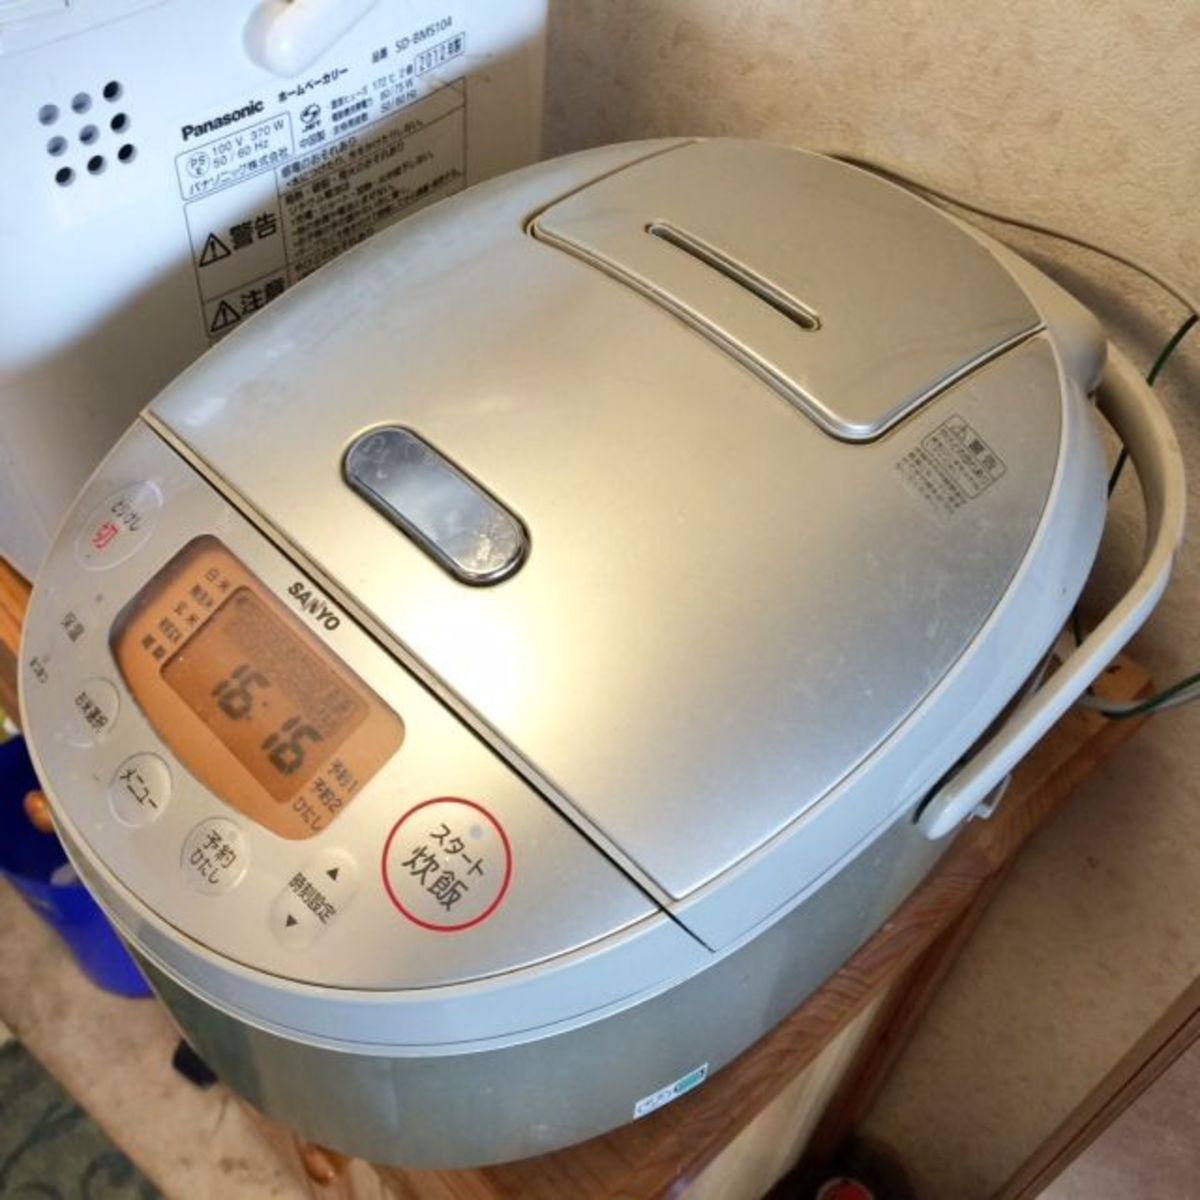 State-of-the-art rice cooker.